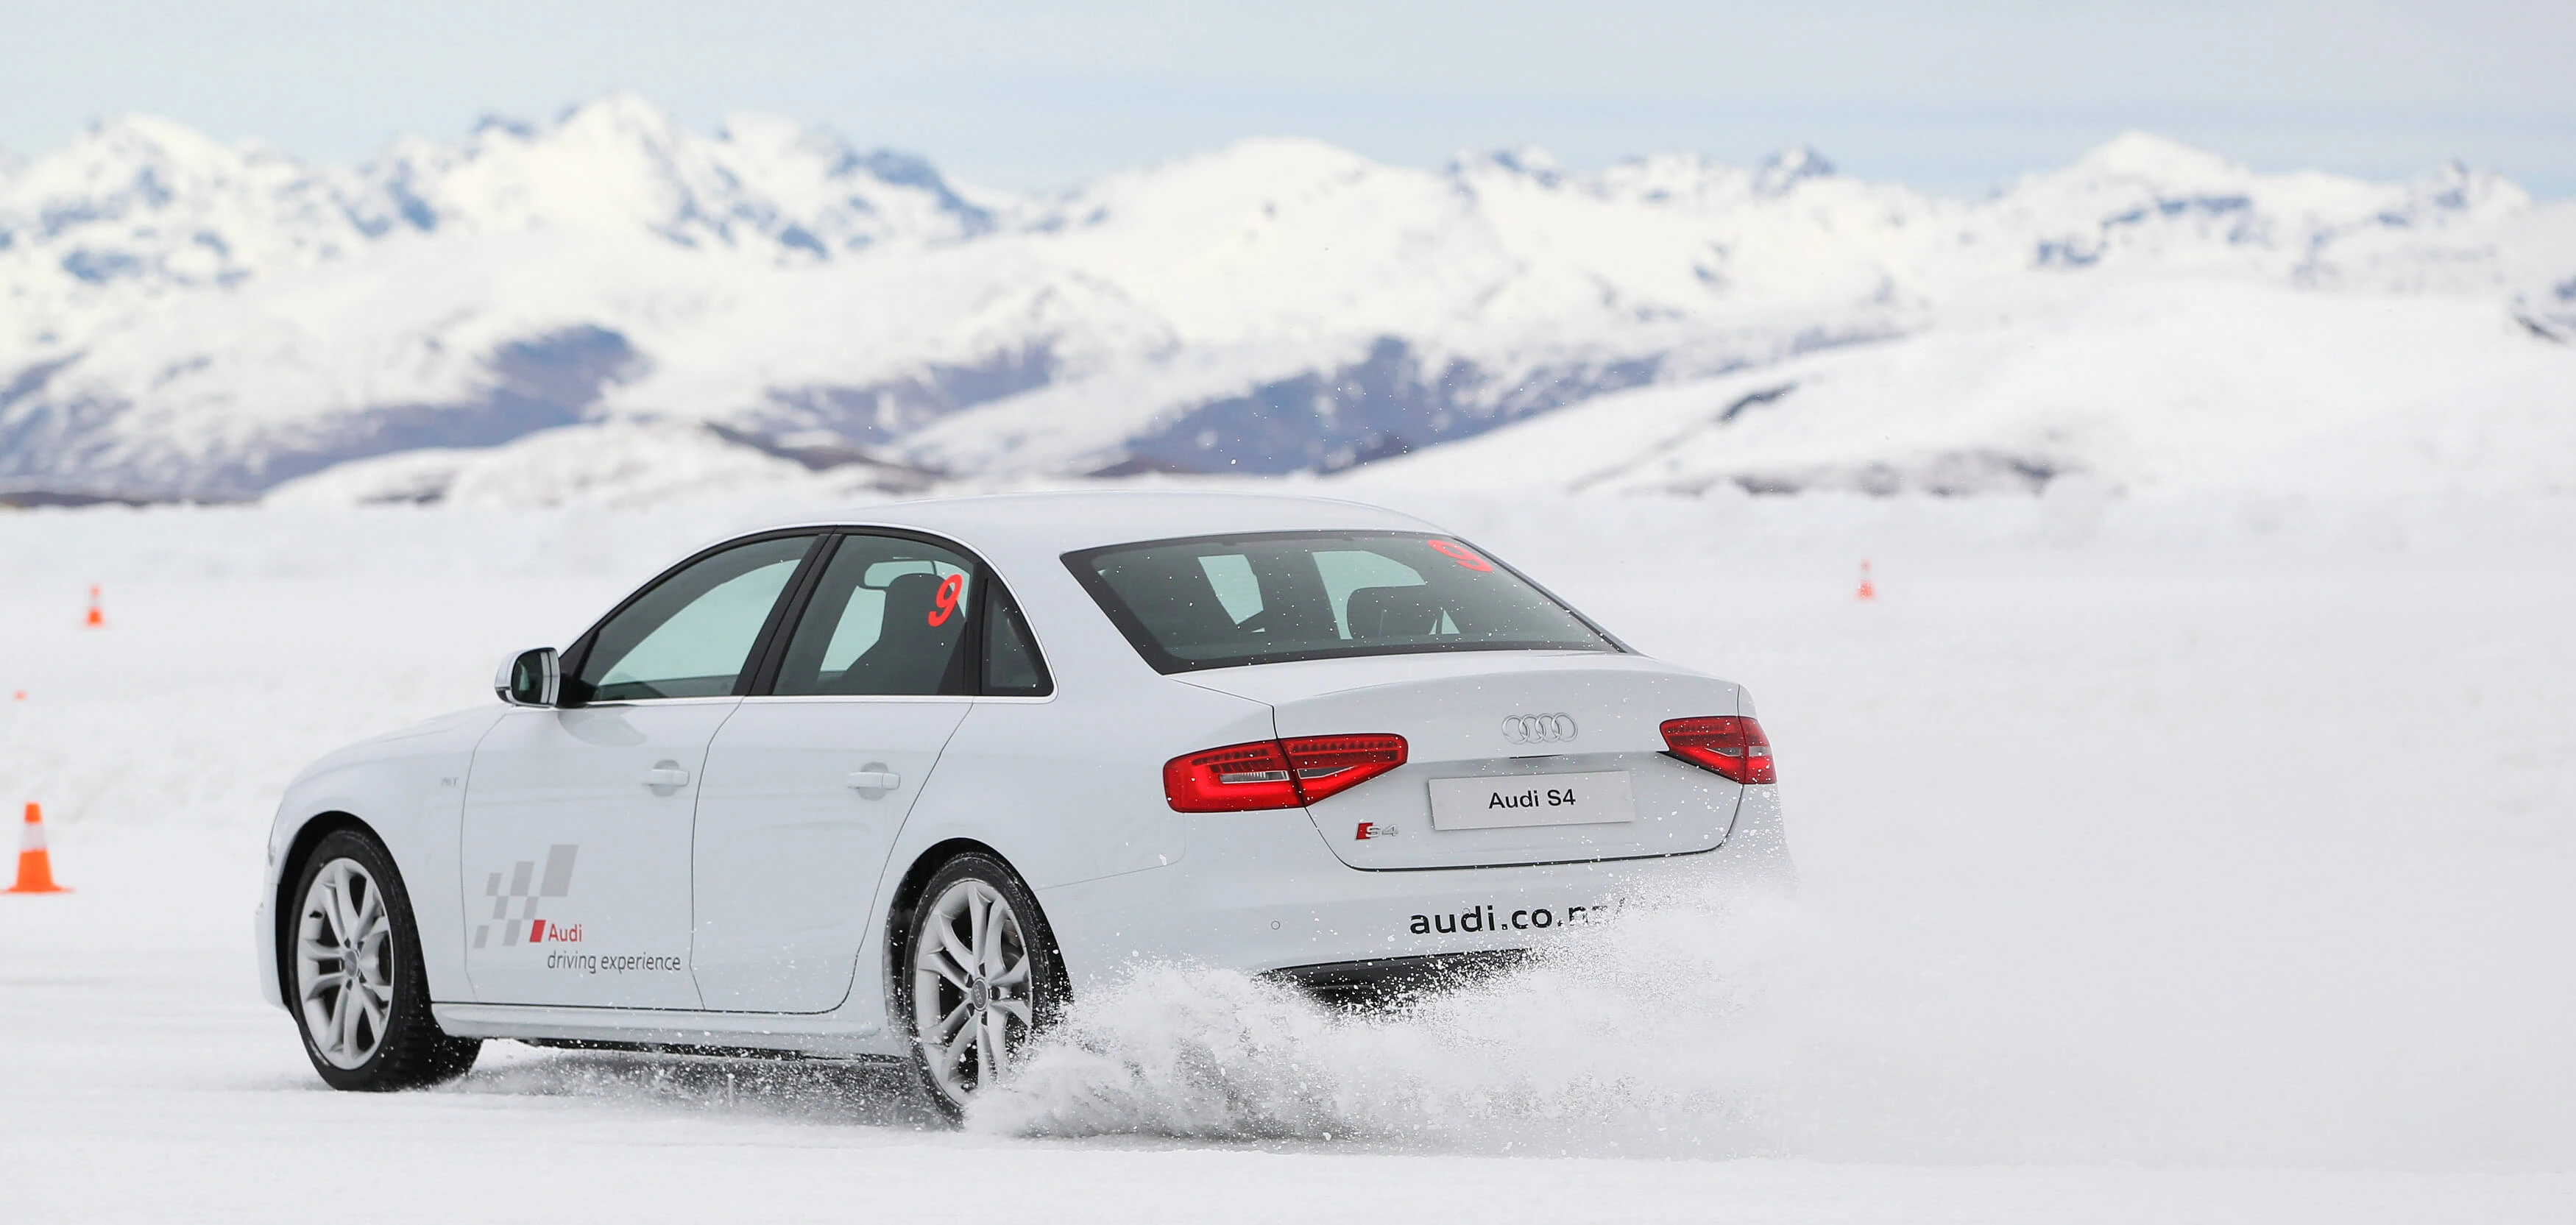 Audi ice driving experience Queenstown